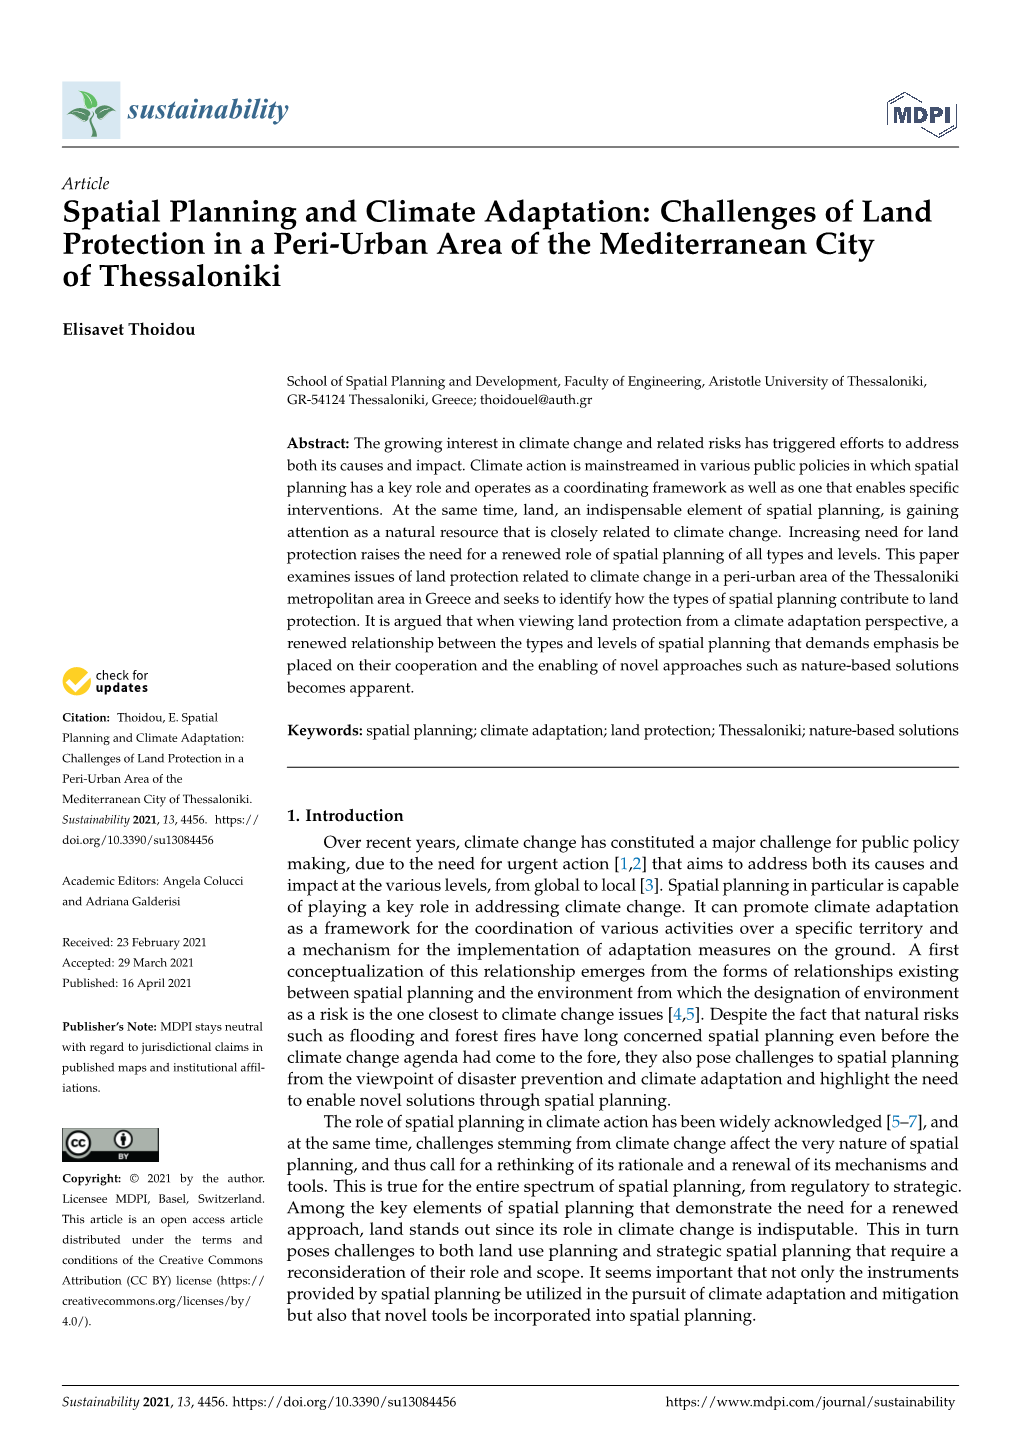 Spatial Planning and Climate Adaptation: Challenges of Land Protection in a Peri-Urban Area of the Mediterranean City of Thessaloniki